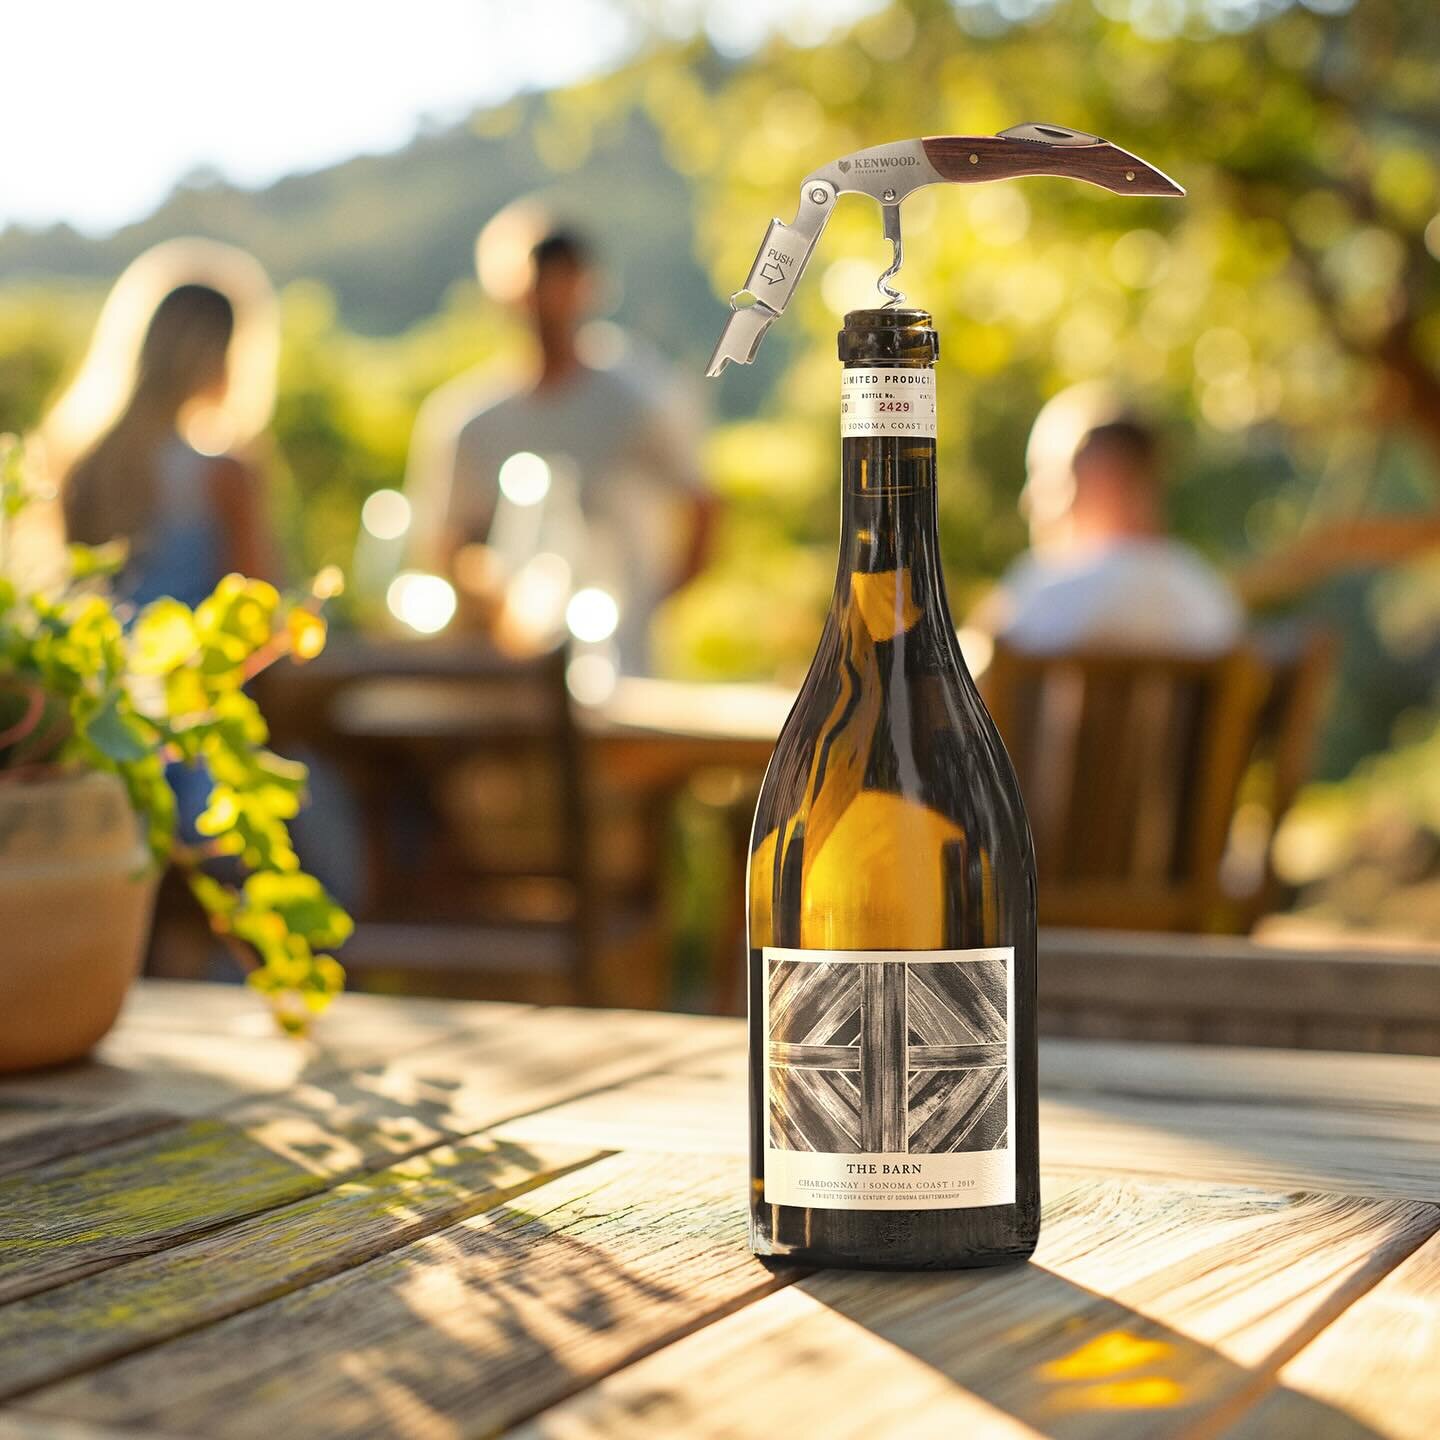 Spot the time traveler! (Swipe) ➡️

We used AI to give this bottle of @kenwoodvineyards The Barn Chardonnay a fresh look. We pulled the bottle from an image we captured in 2022 at their winery (photo 2) and composited it into a new lifestyle scene ge